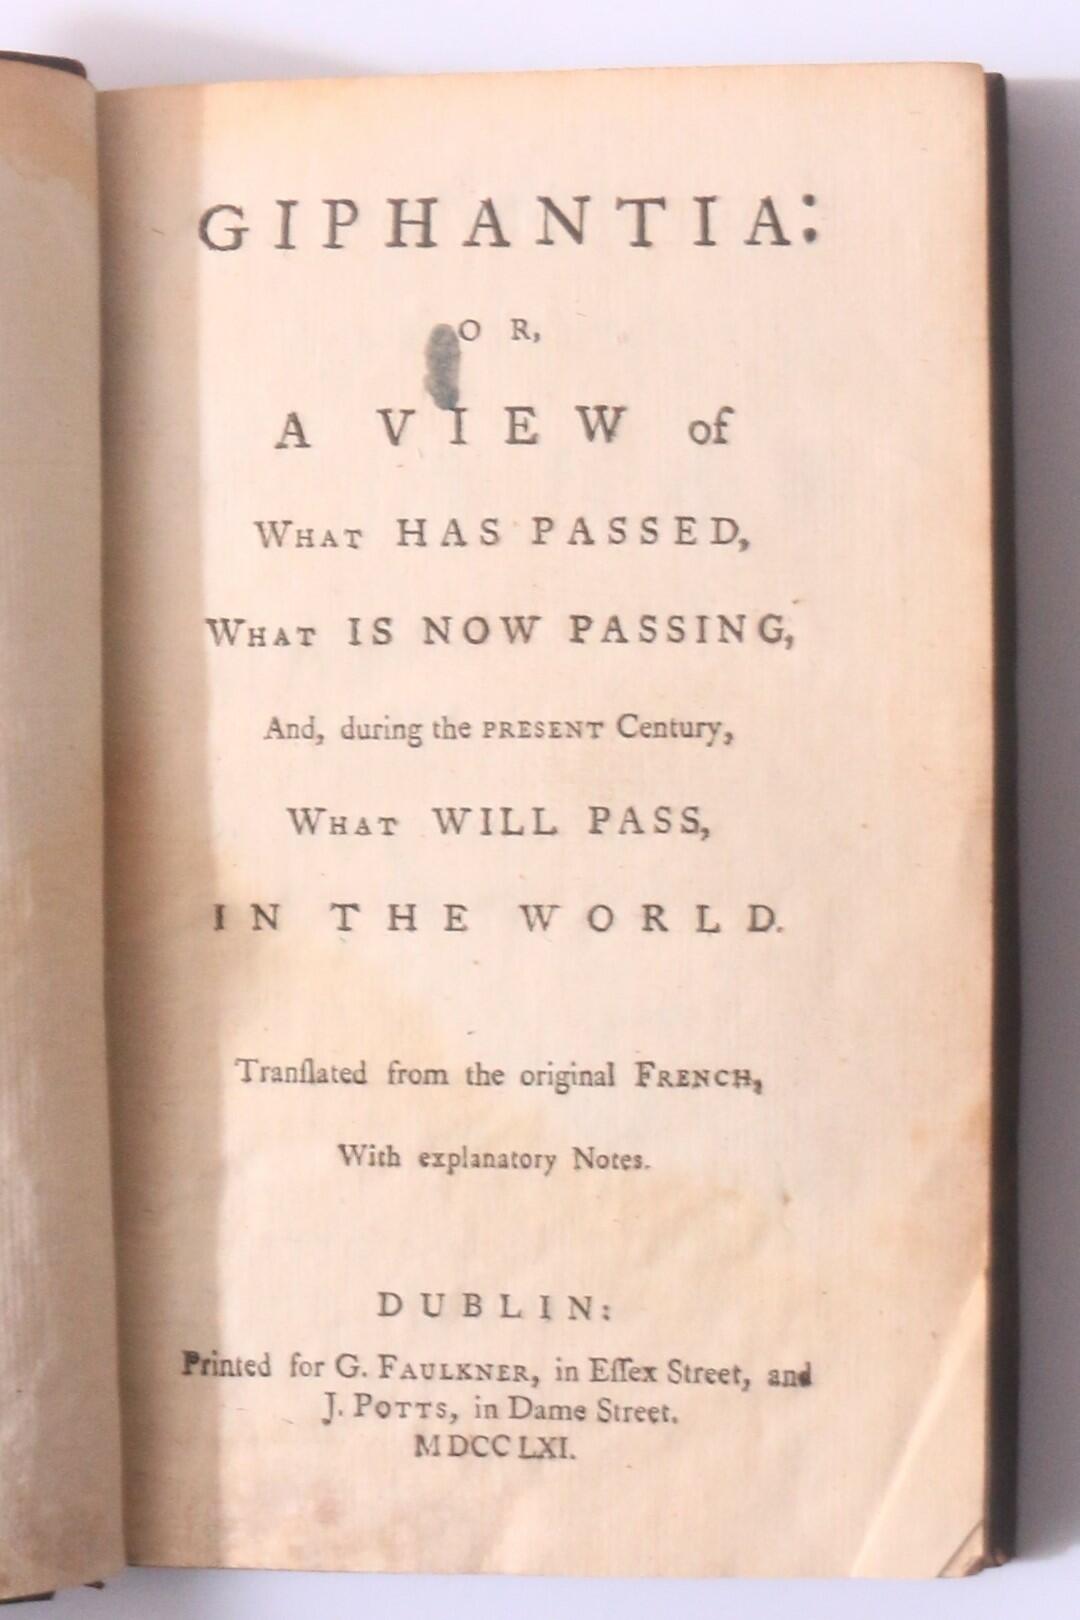 Charles-Fran?ois Tiphaigne De La Roche - Giphantia: Or a View of What has Passed, What is now Passing, and, During the Present Century, What Will Pass, in the World - G. Faulkner, 1761, First Edition.